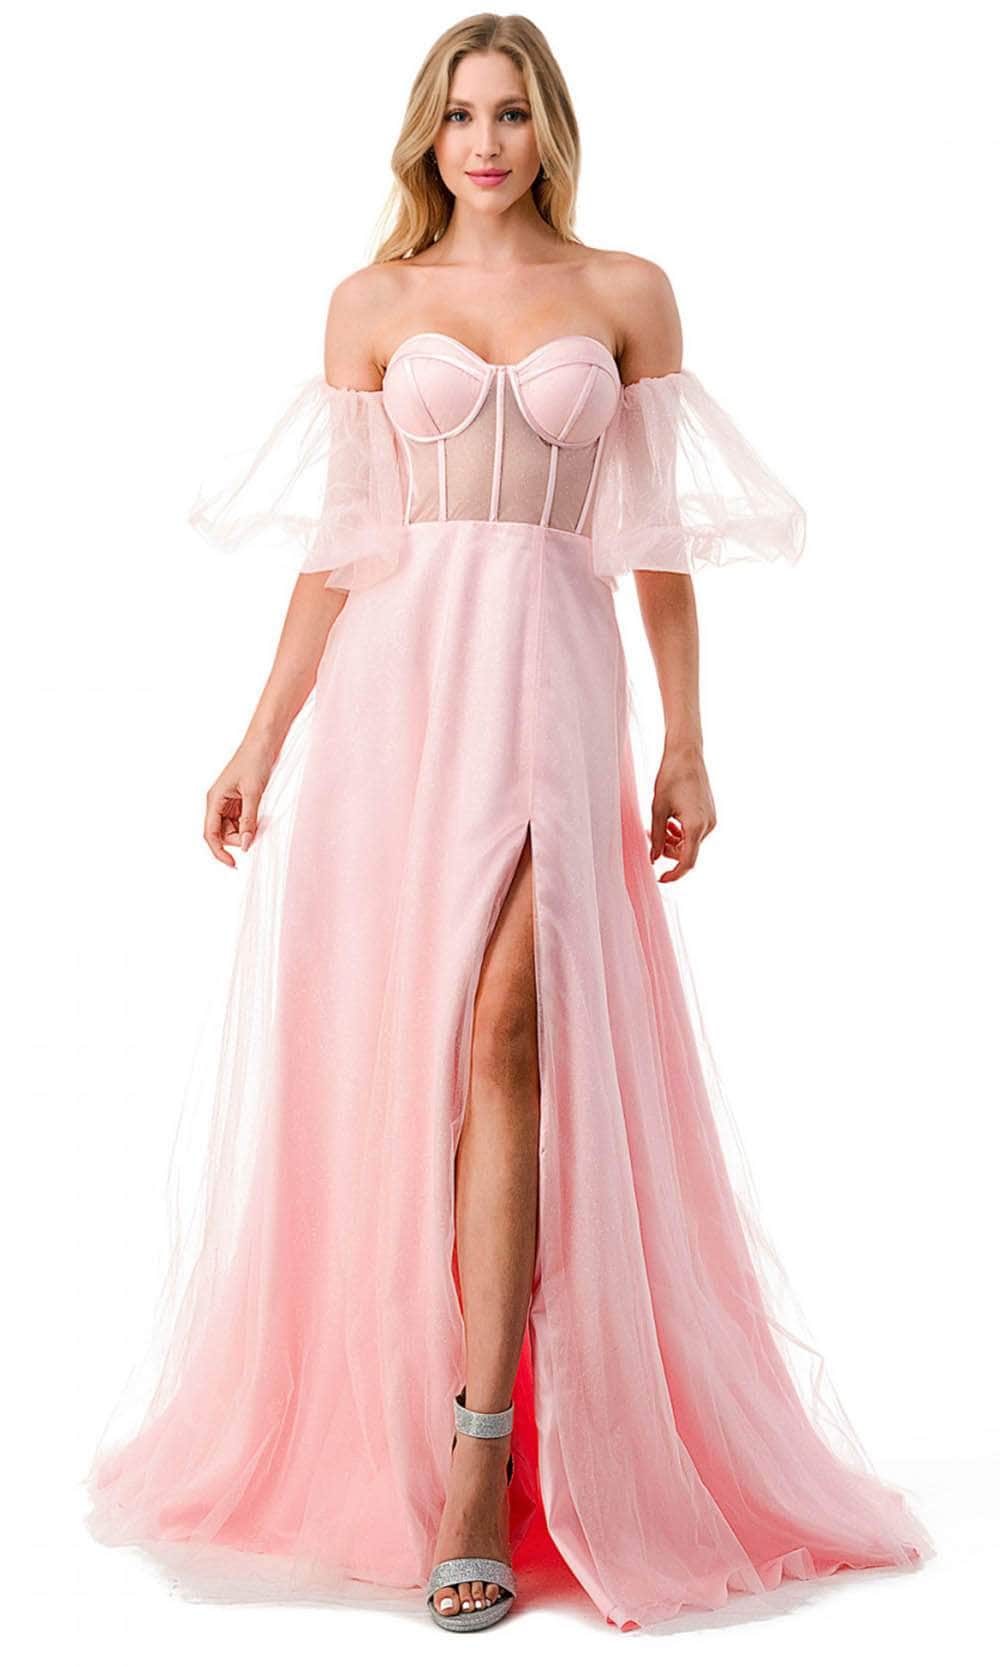 Image of Aspeed Design L2793B - Sweetheart Illusion Corset Evening Gown